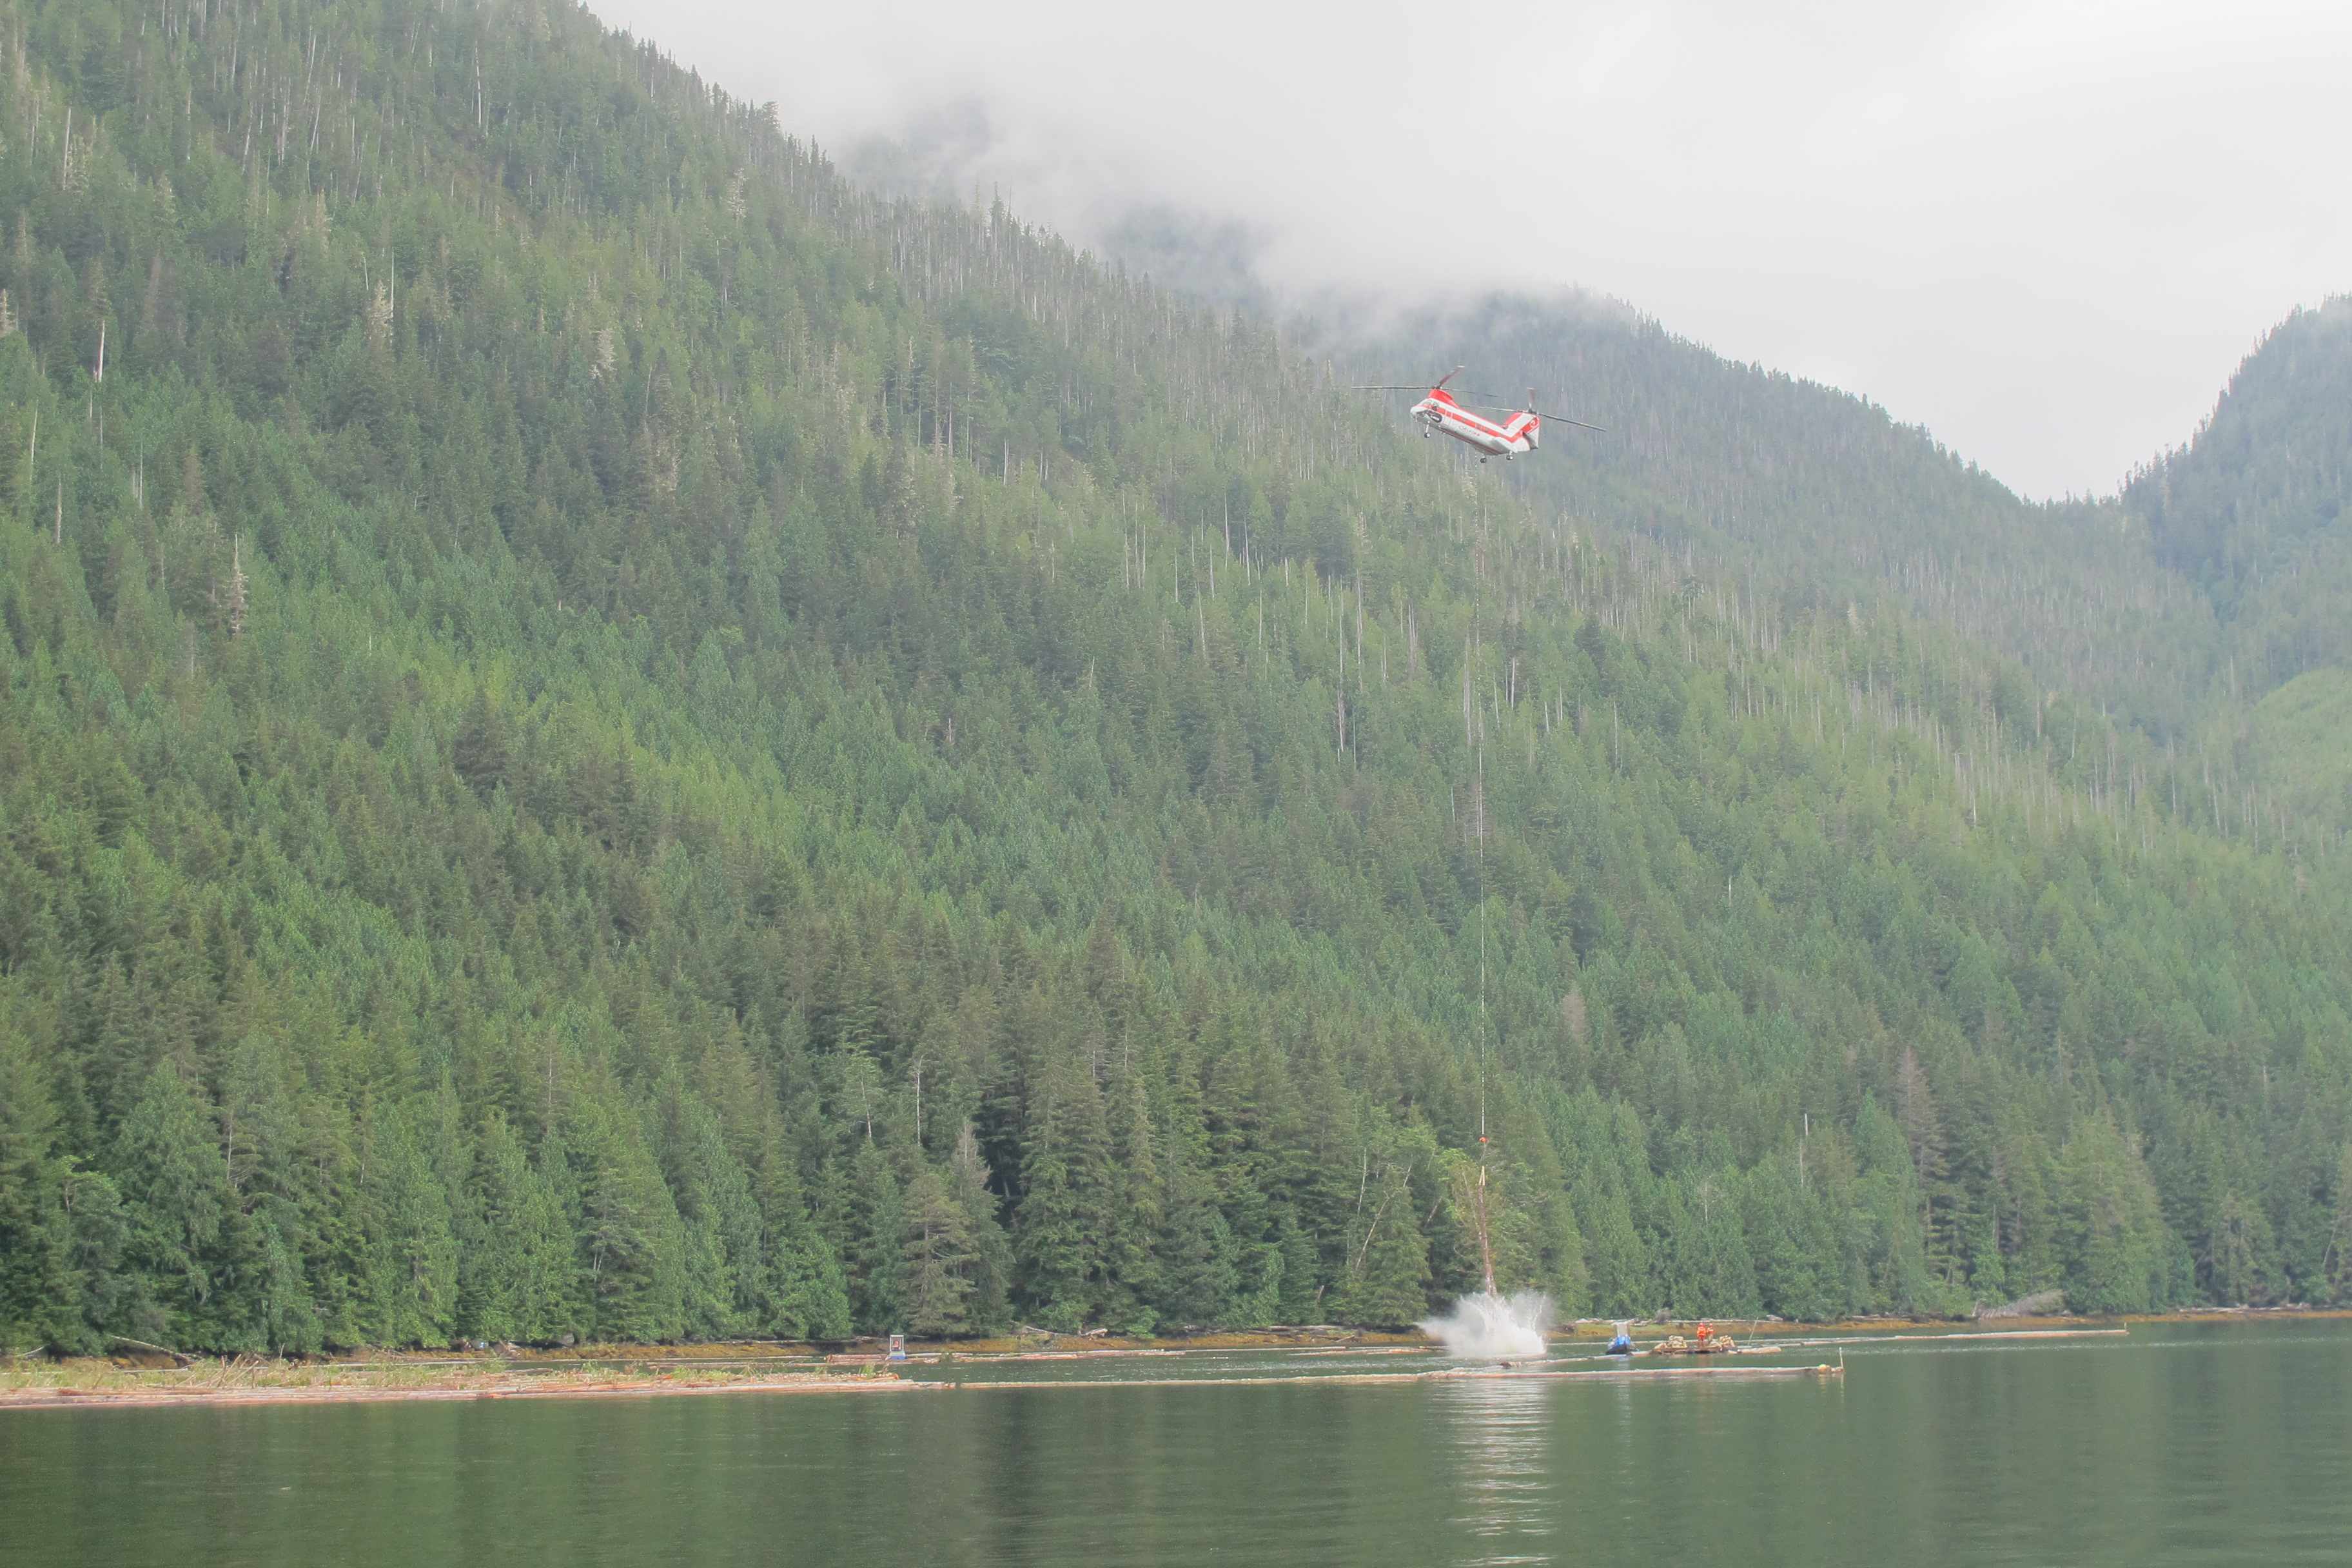 Heli-logging in Kingcome Inlet. There is lots of resource extraction going on in the Northern Part of the Inside Passage